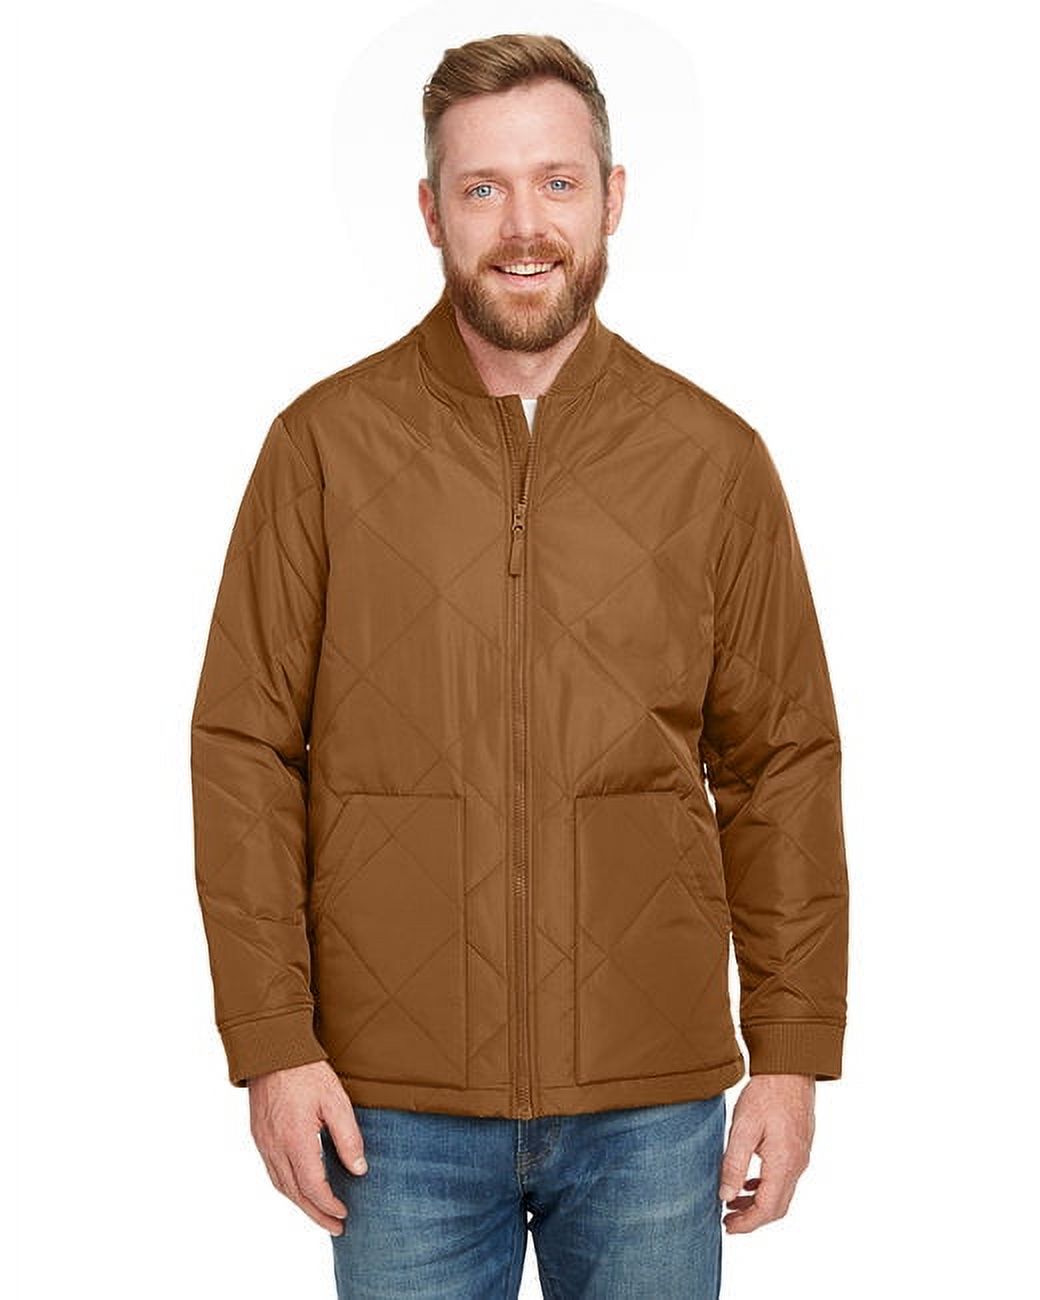 Adult Dockside Insulated Utility Jacket - DUCK BROWN - 4XL - image 1 of 3